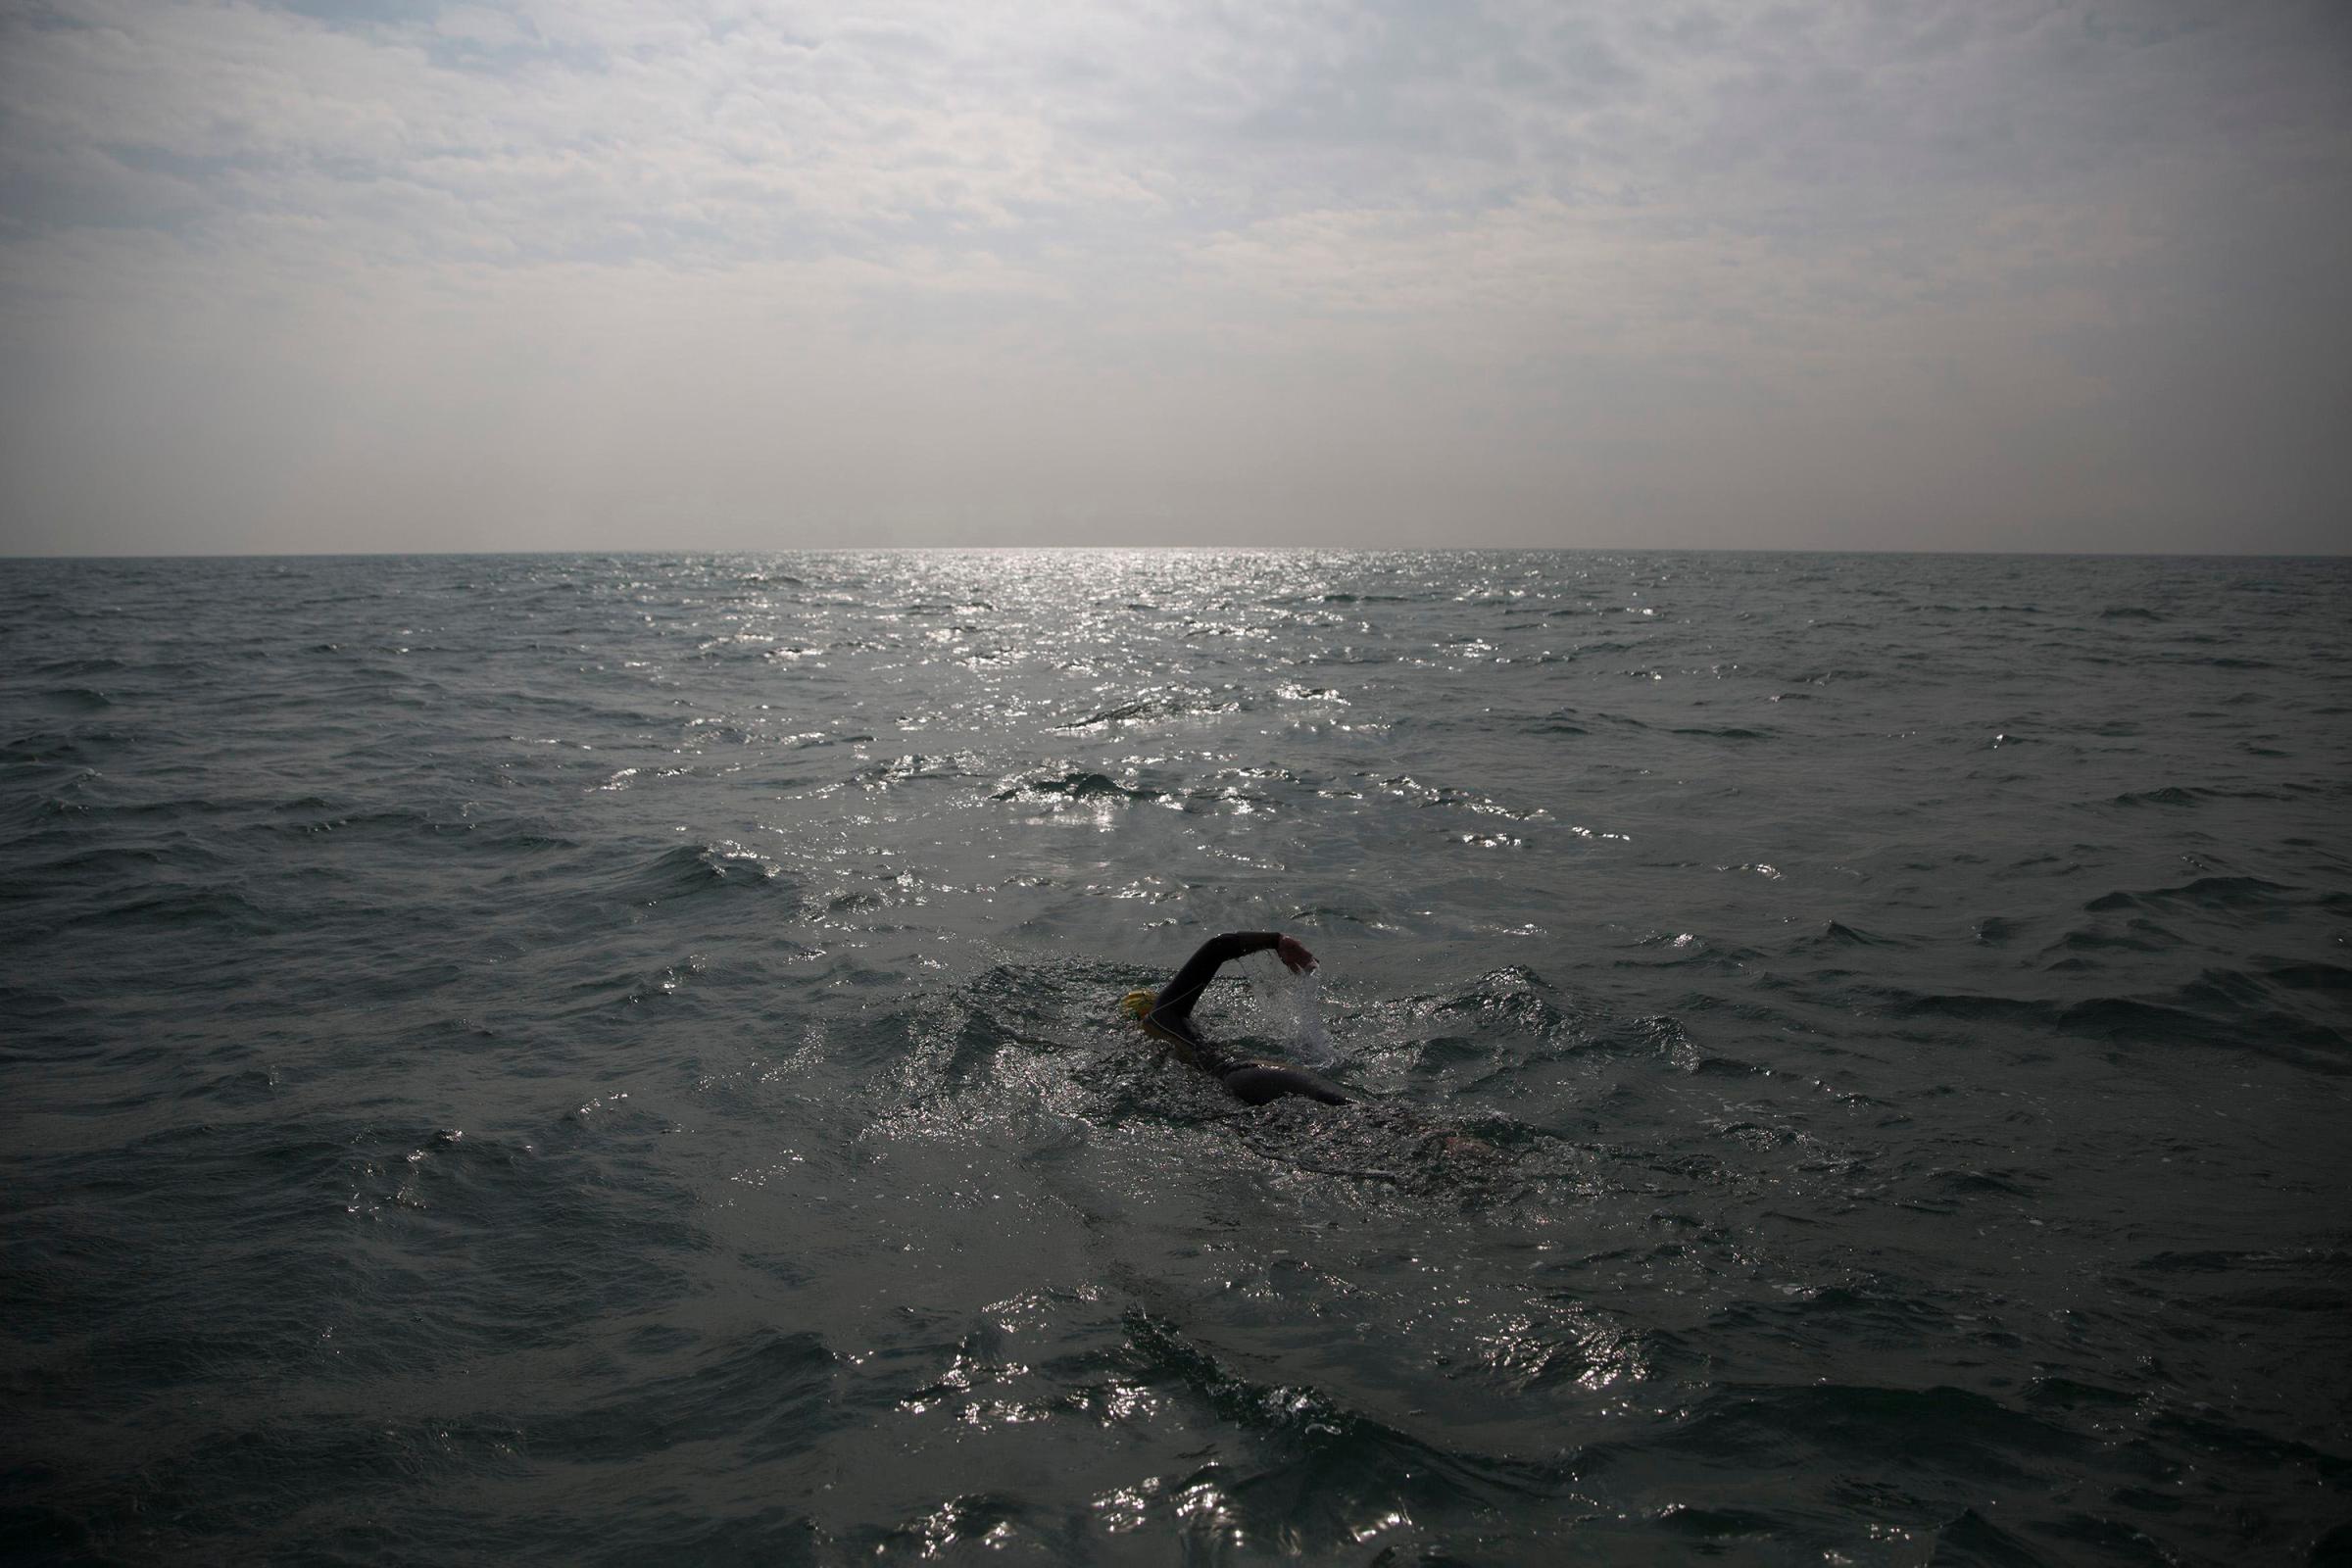 Paul Parrish swims as he takes part in the Arch to Arc triathlon in the channel between England and France